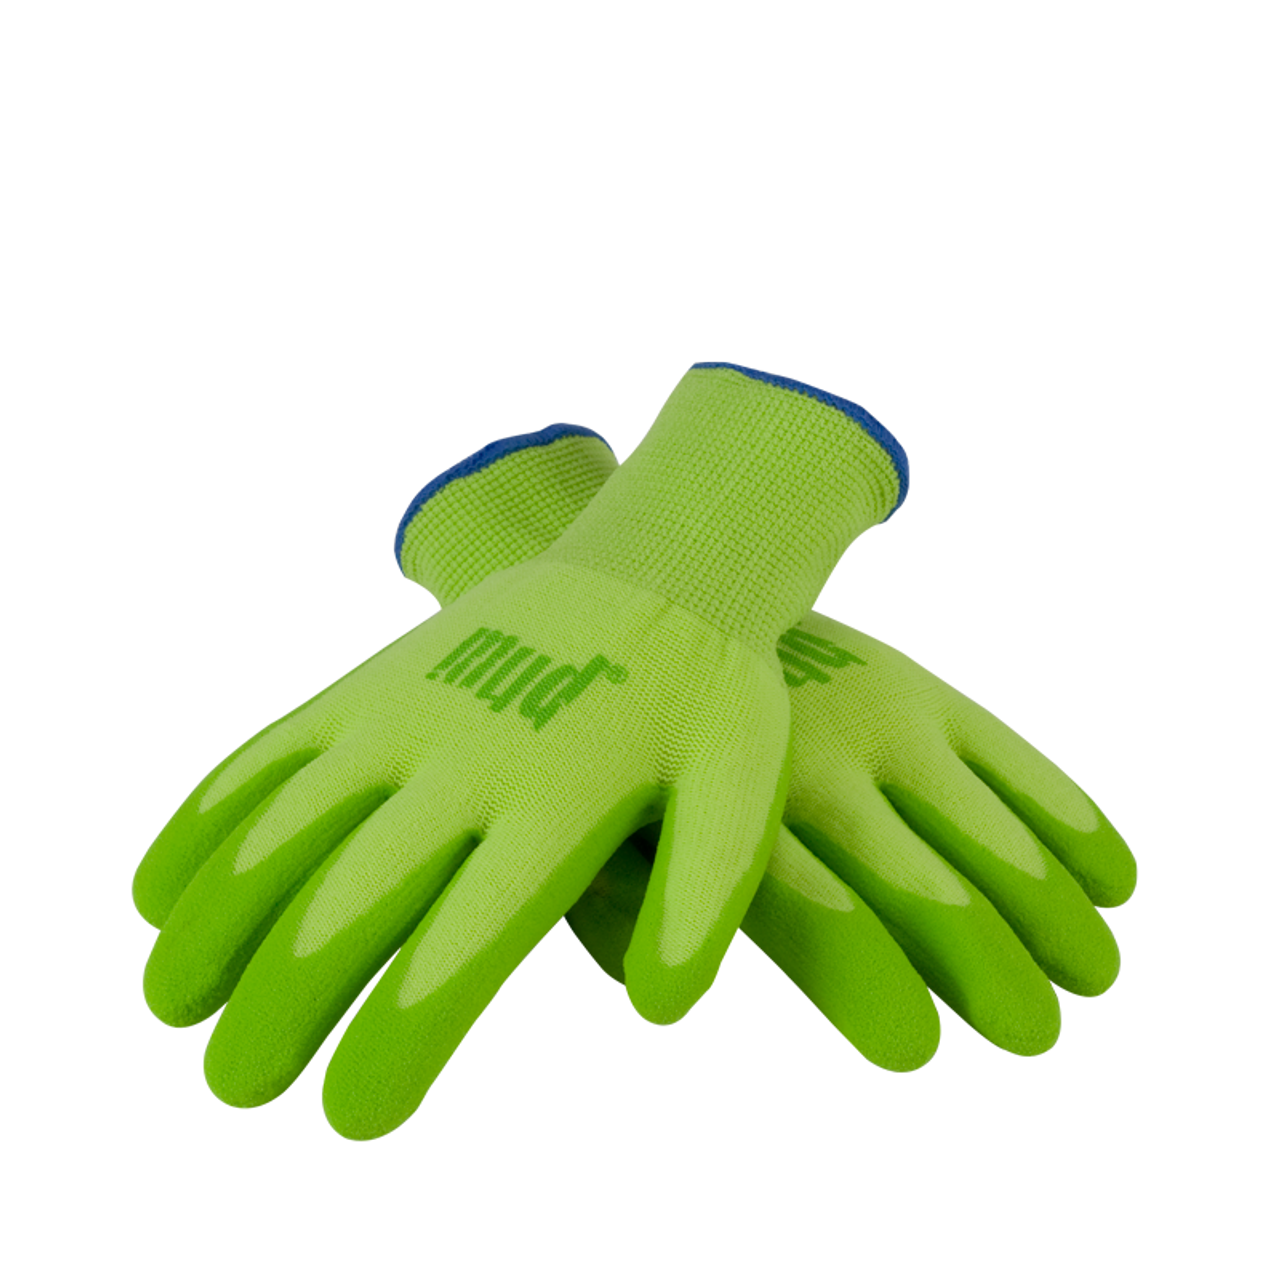 https://cdn11.bigcommerce.com/s-pgqgc/images/stencil/1280x1280/products/89/317/kids_green_gloves__39579.1442607514.png?c=2